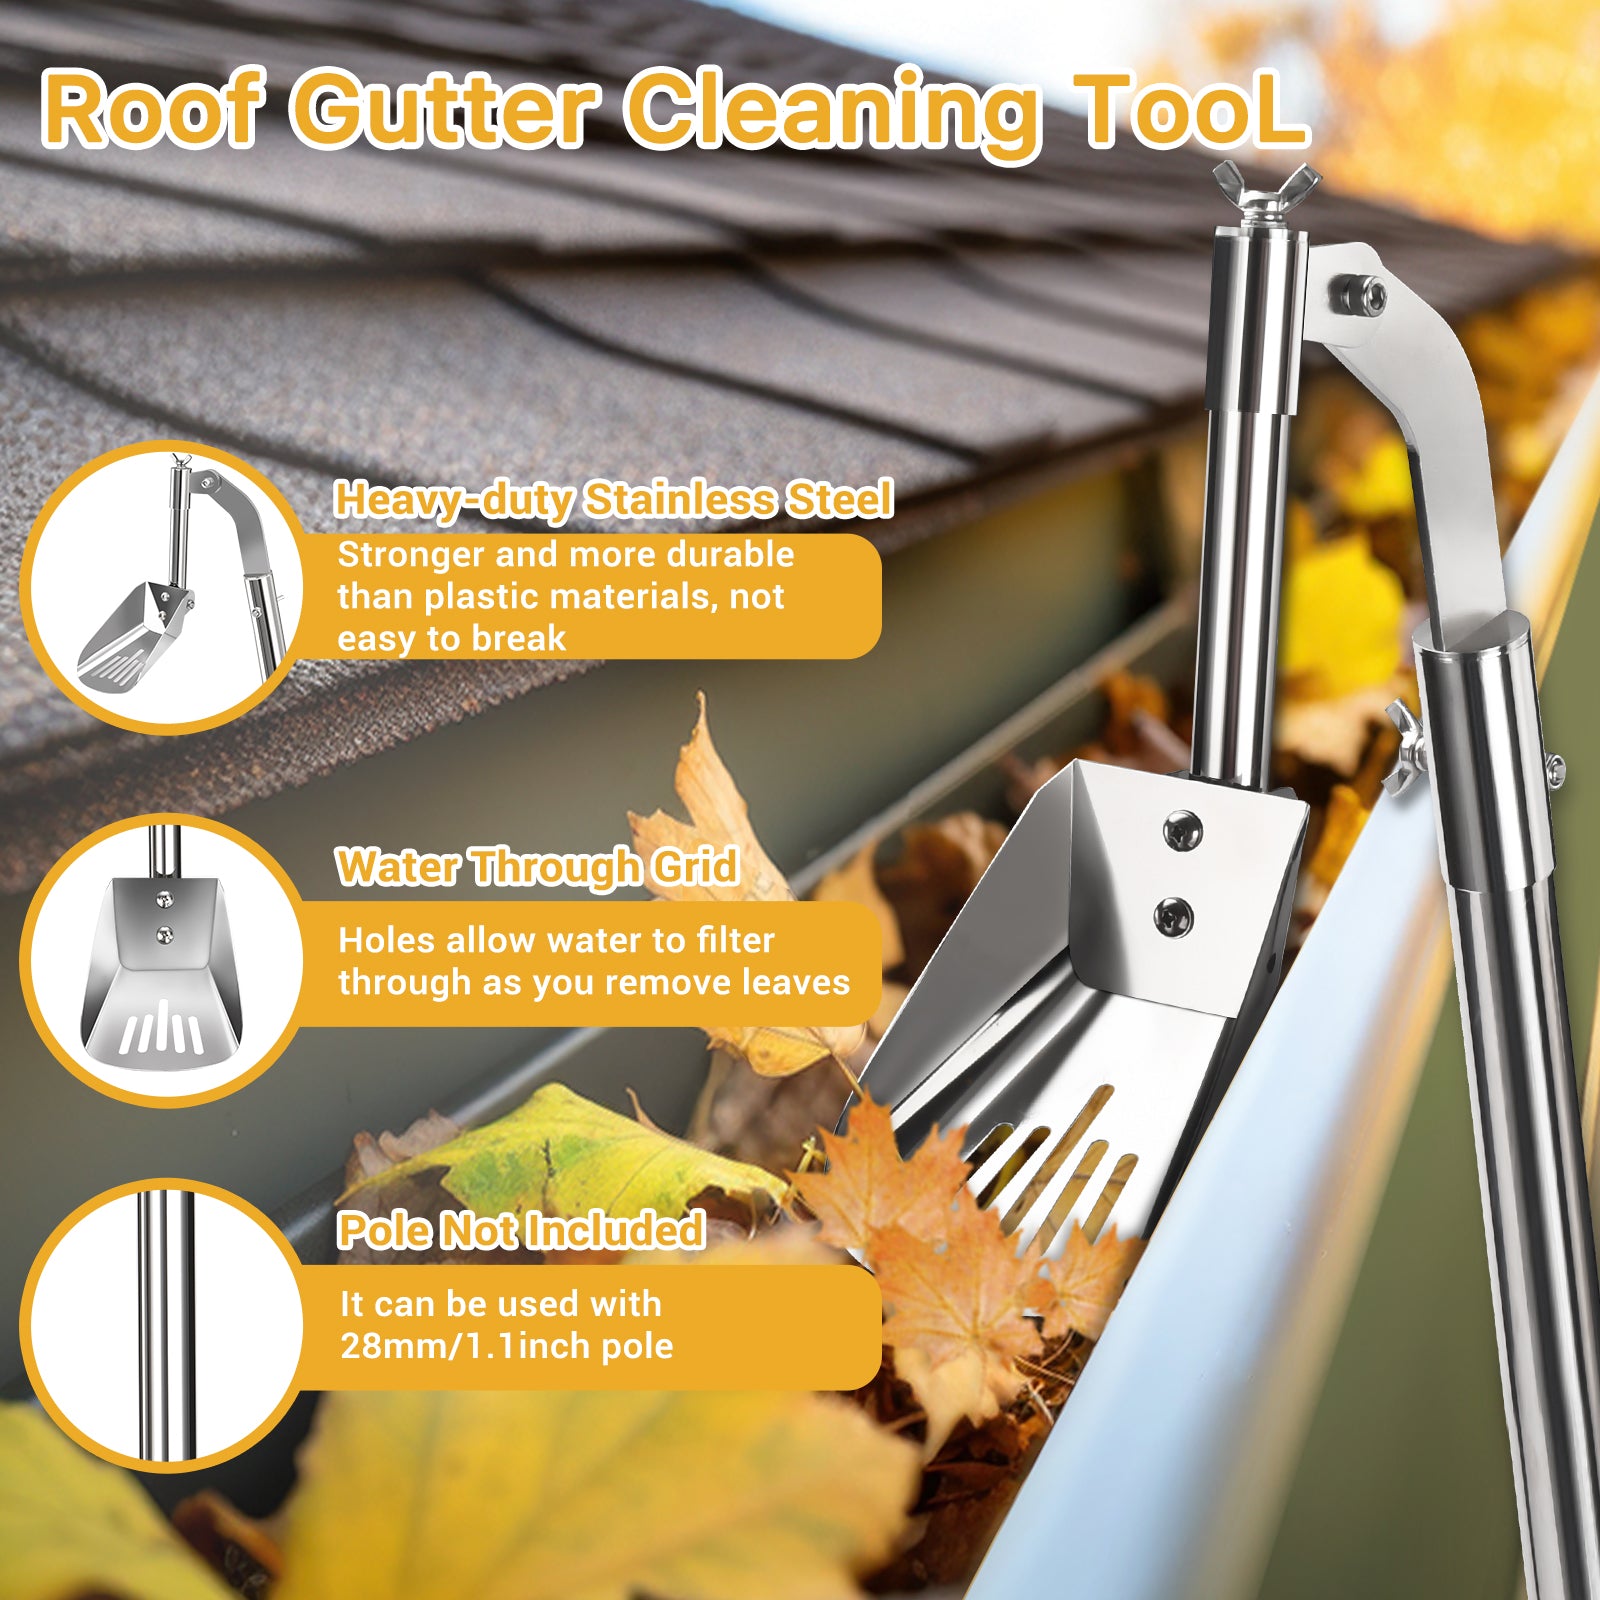 CAROD Home Gutter Cleaning Tool, Guard Gutter Cleaner Scoop, Stainless Steel Roof Gutter Tool for Garden, Ditch, Villas, Townhouses Standard Gutters, Easy Remove Leaves Debris, Pole Not Included